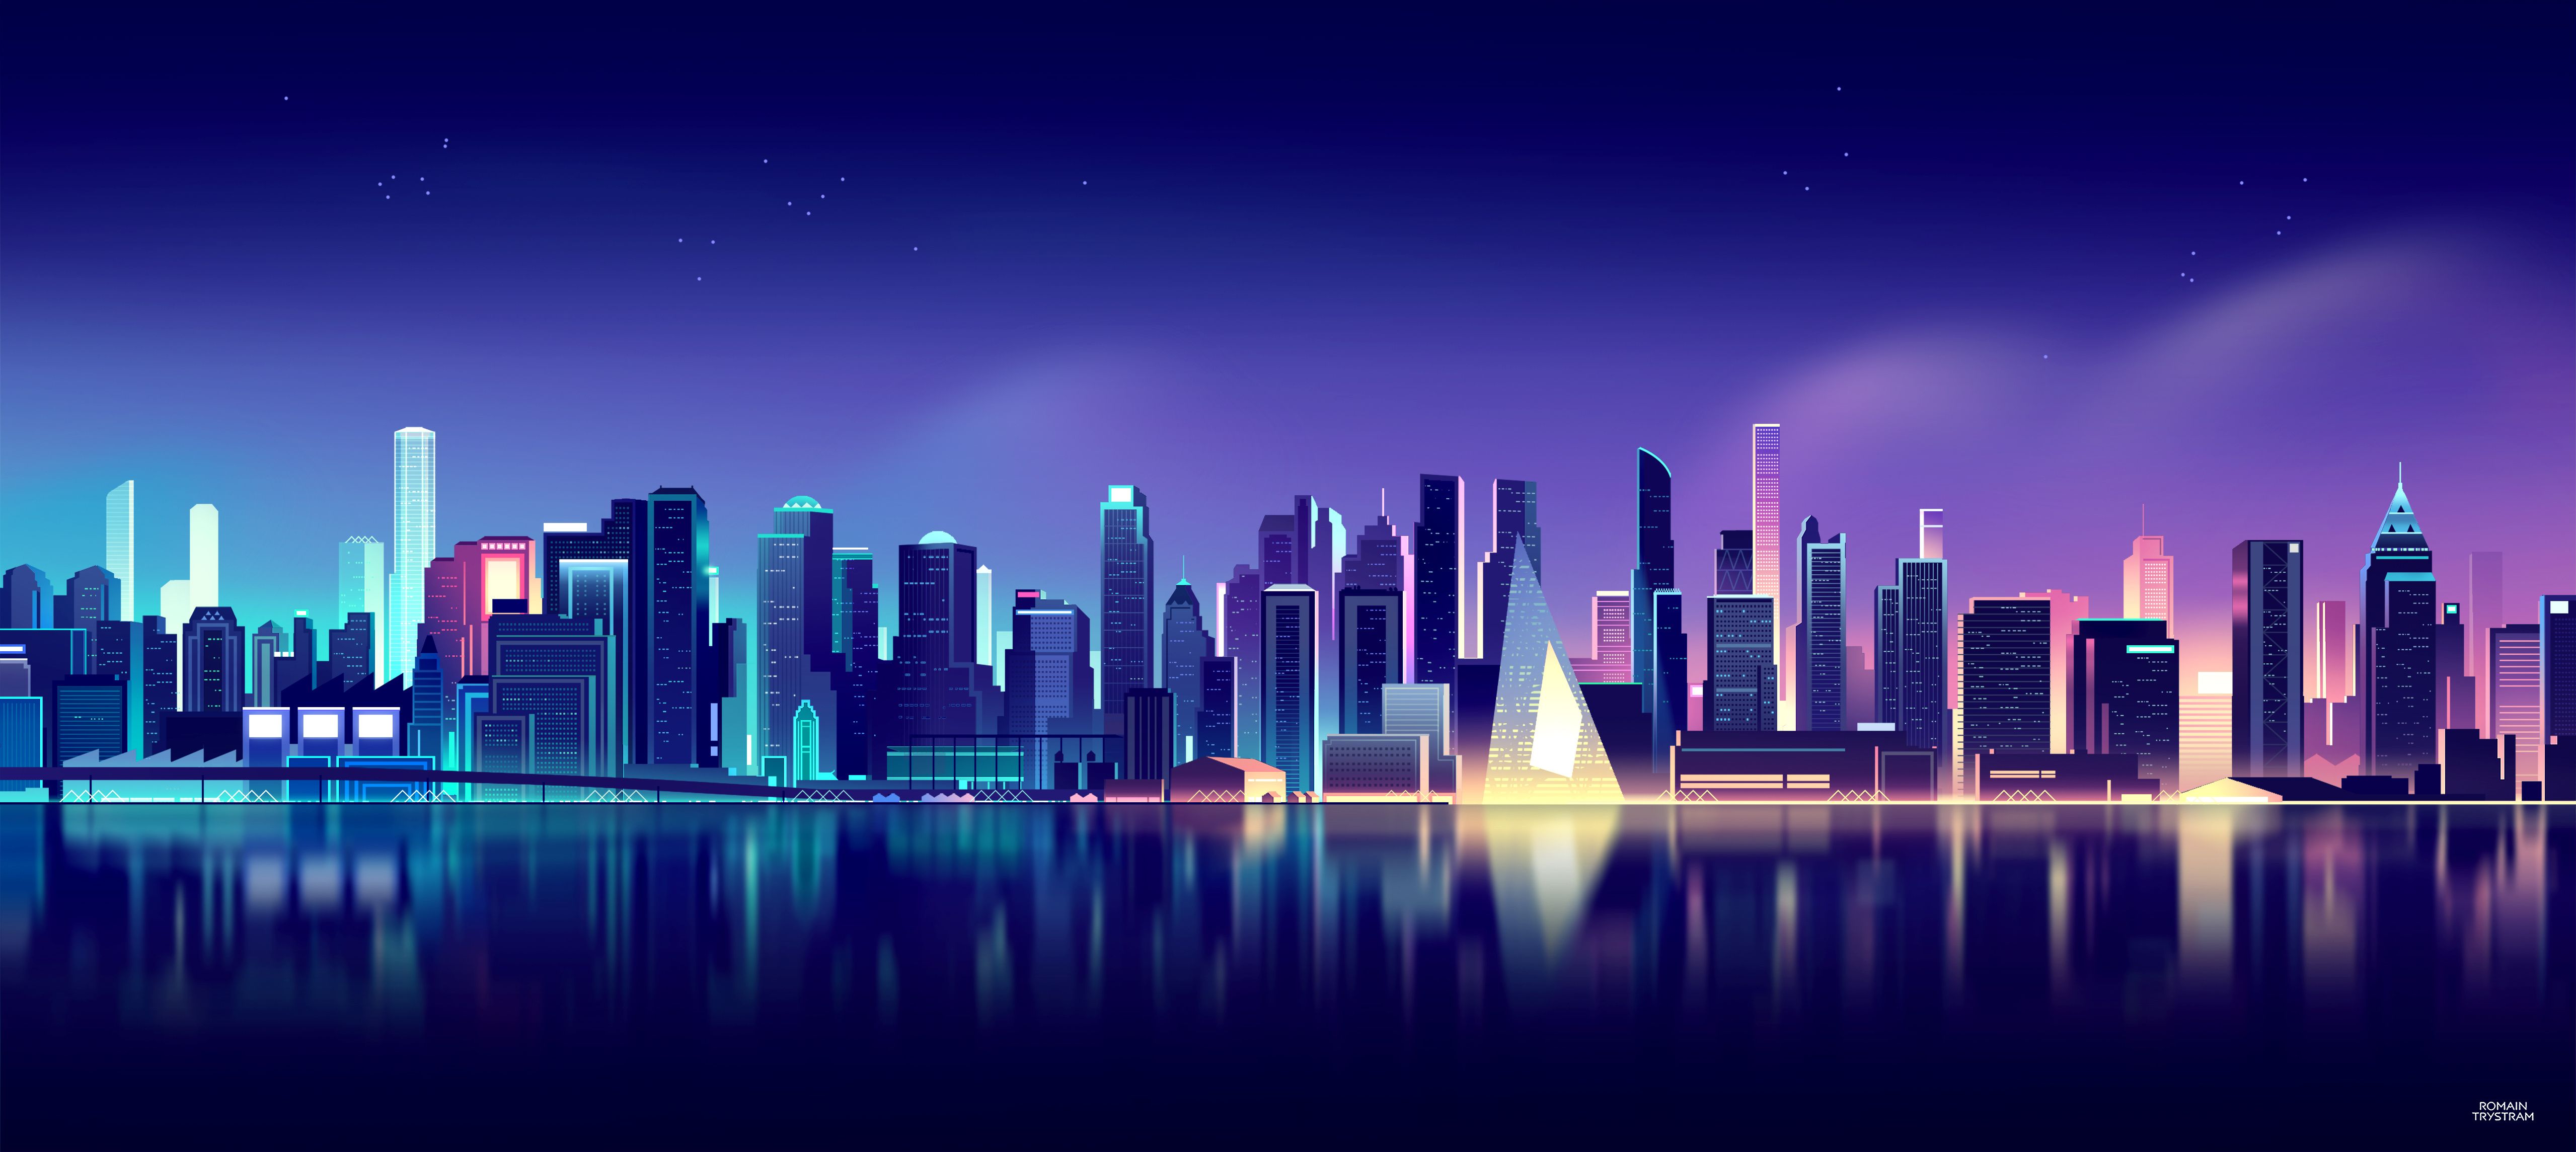 A city skyline at night with blue water - Skyline